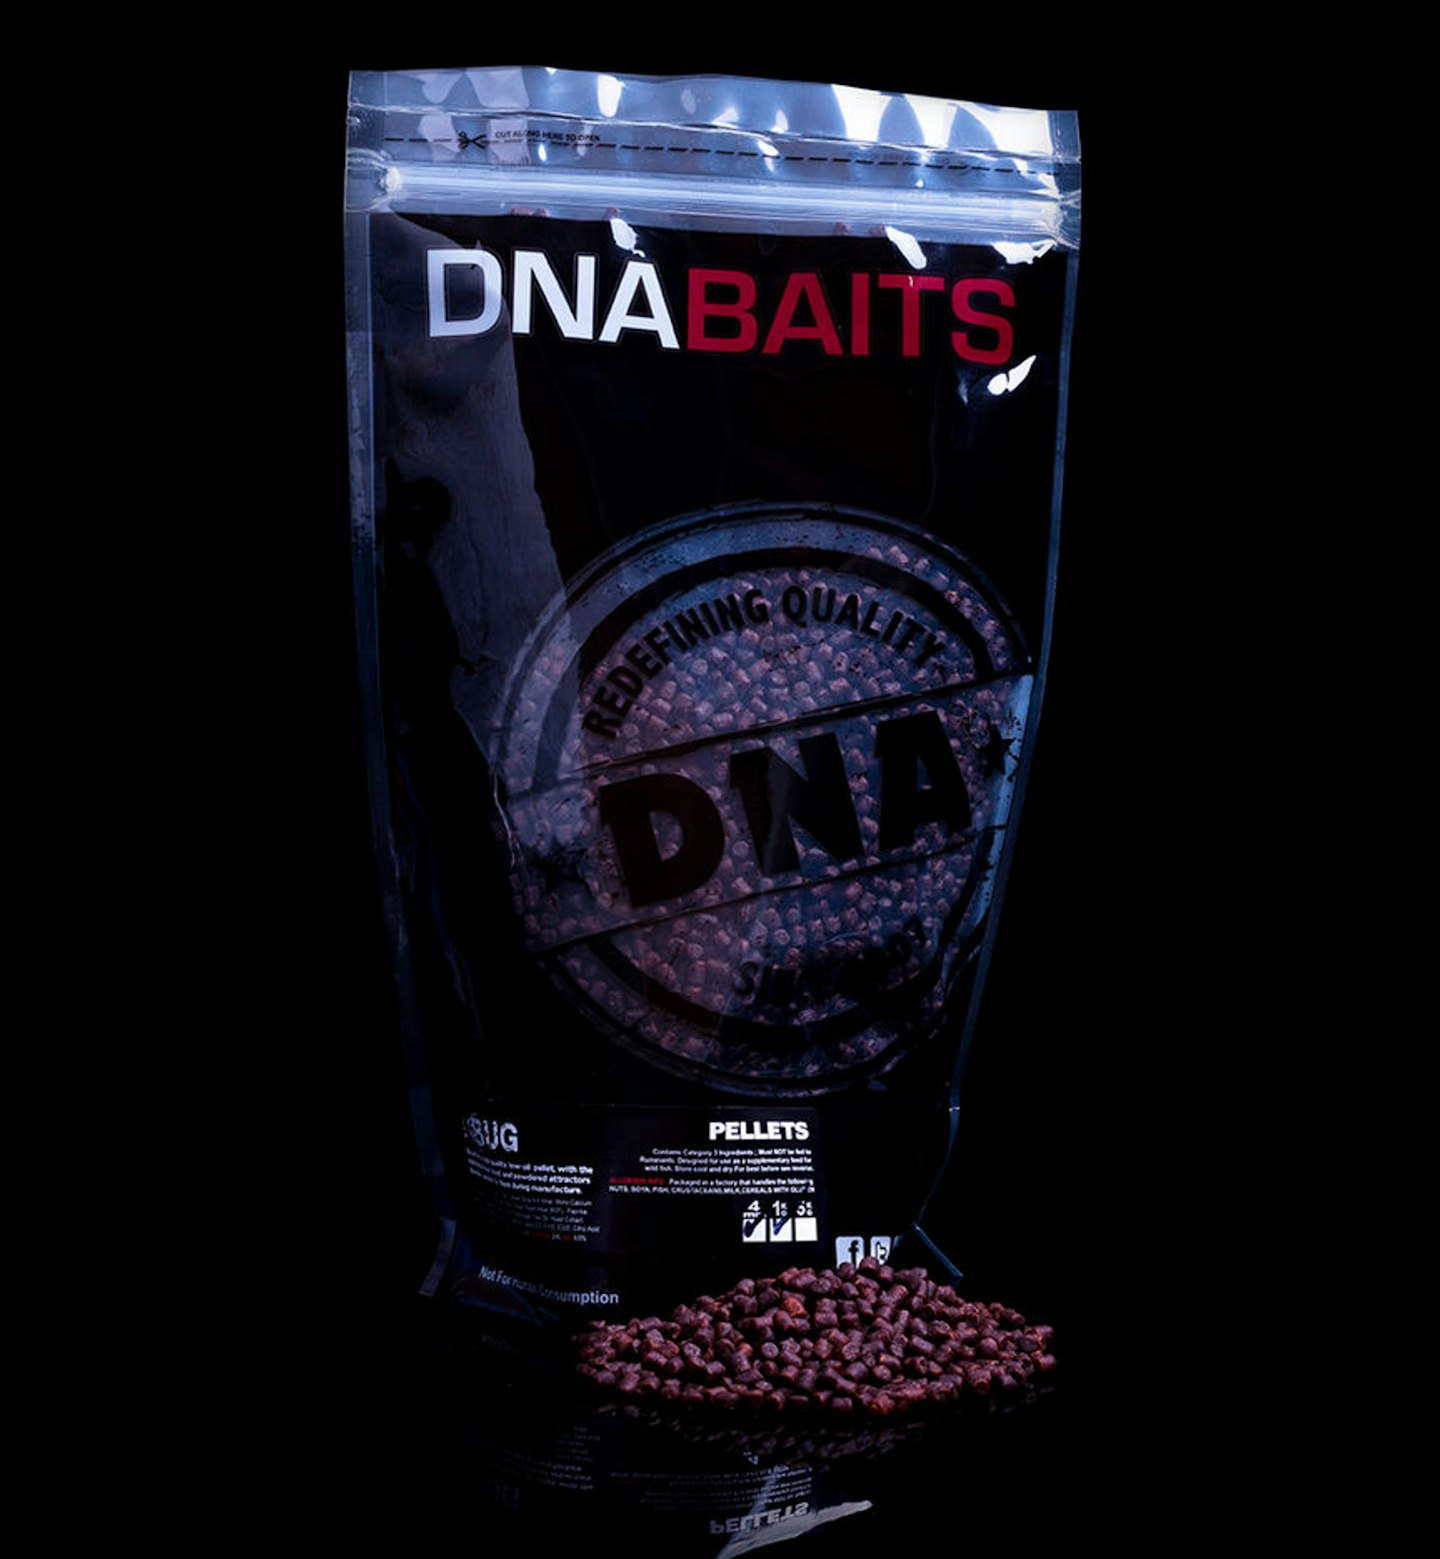 DNA Baits is another mover (or should that be wriggler?) in the market with “The Bug” baits range